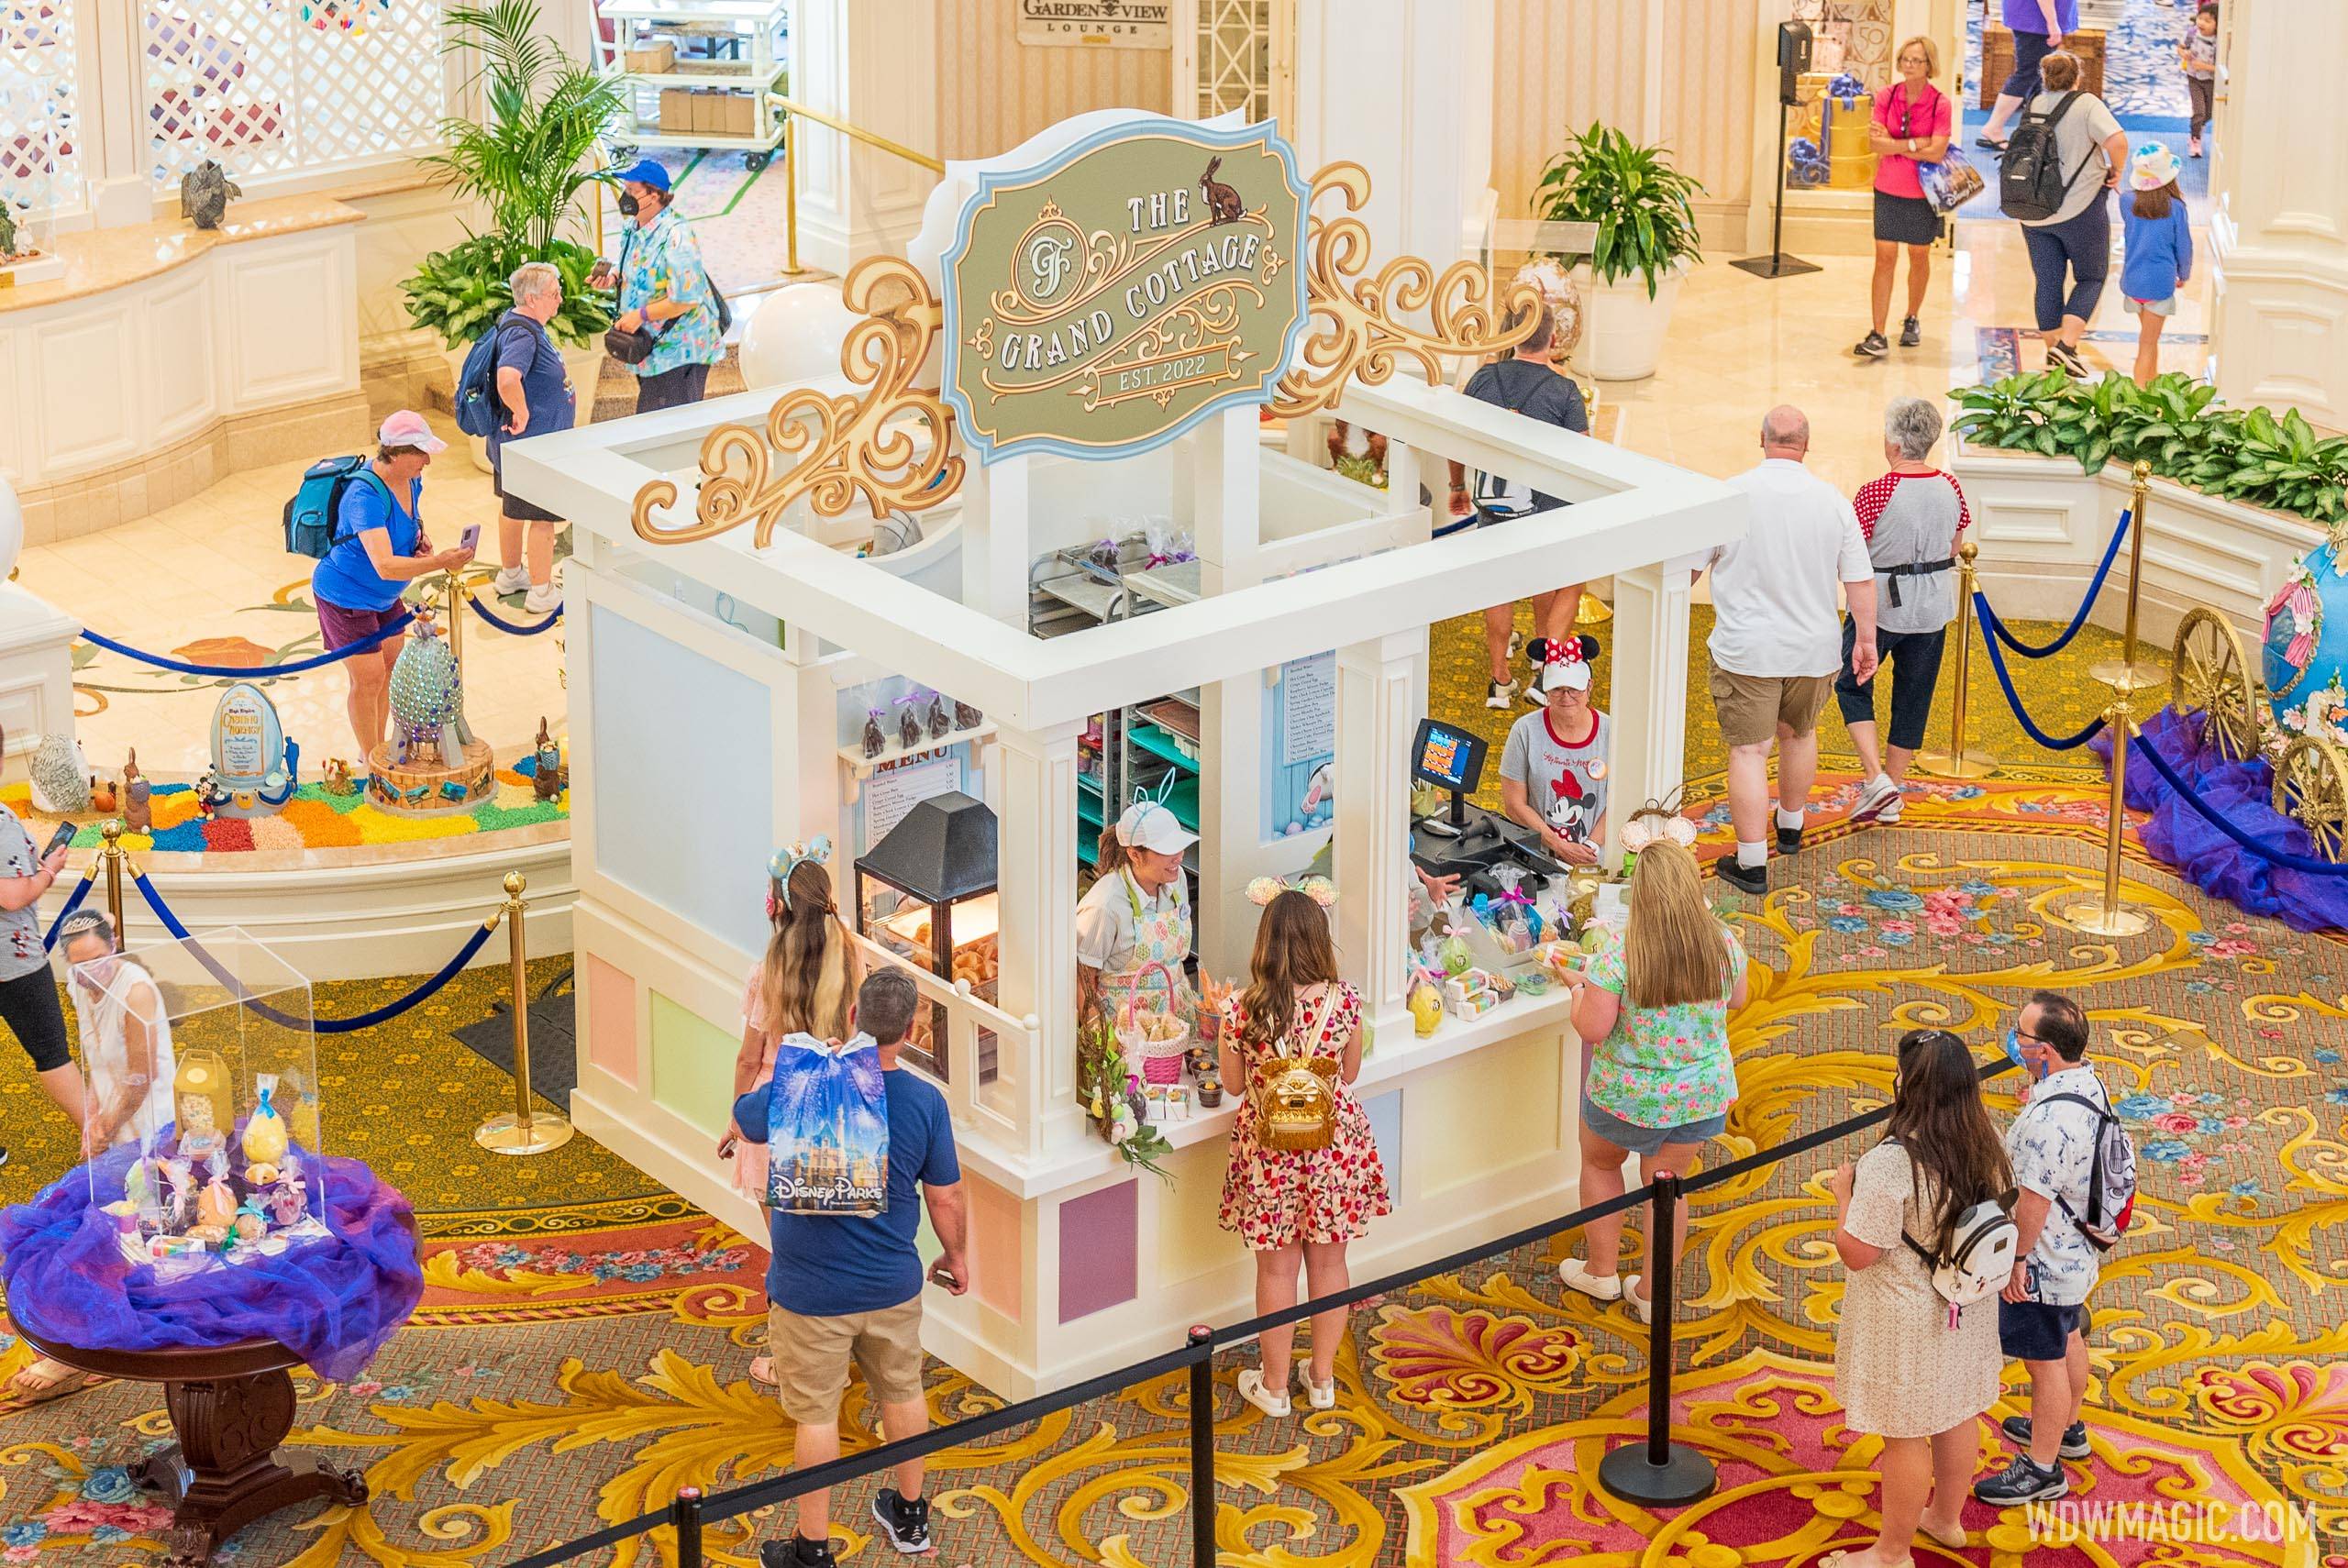 The Grand Cottage and annual Easter egg display opens at Disney's Grand Floridian Resort